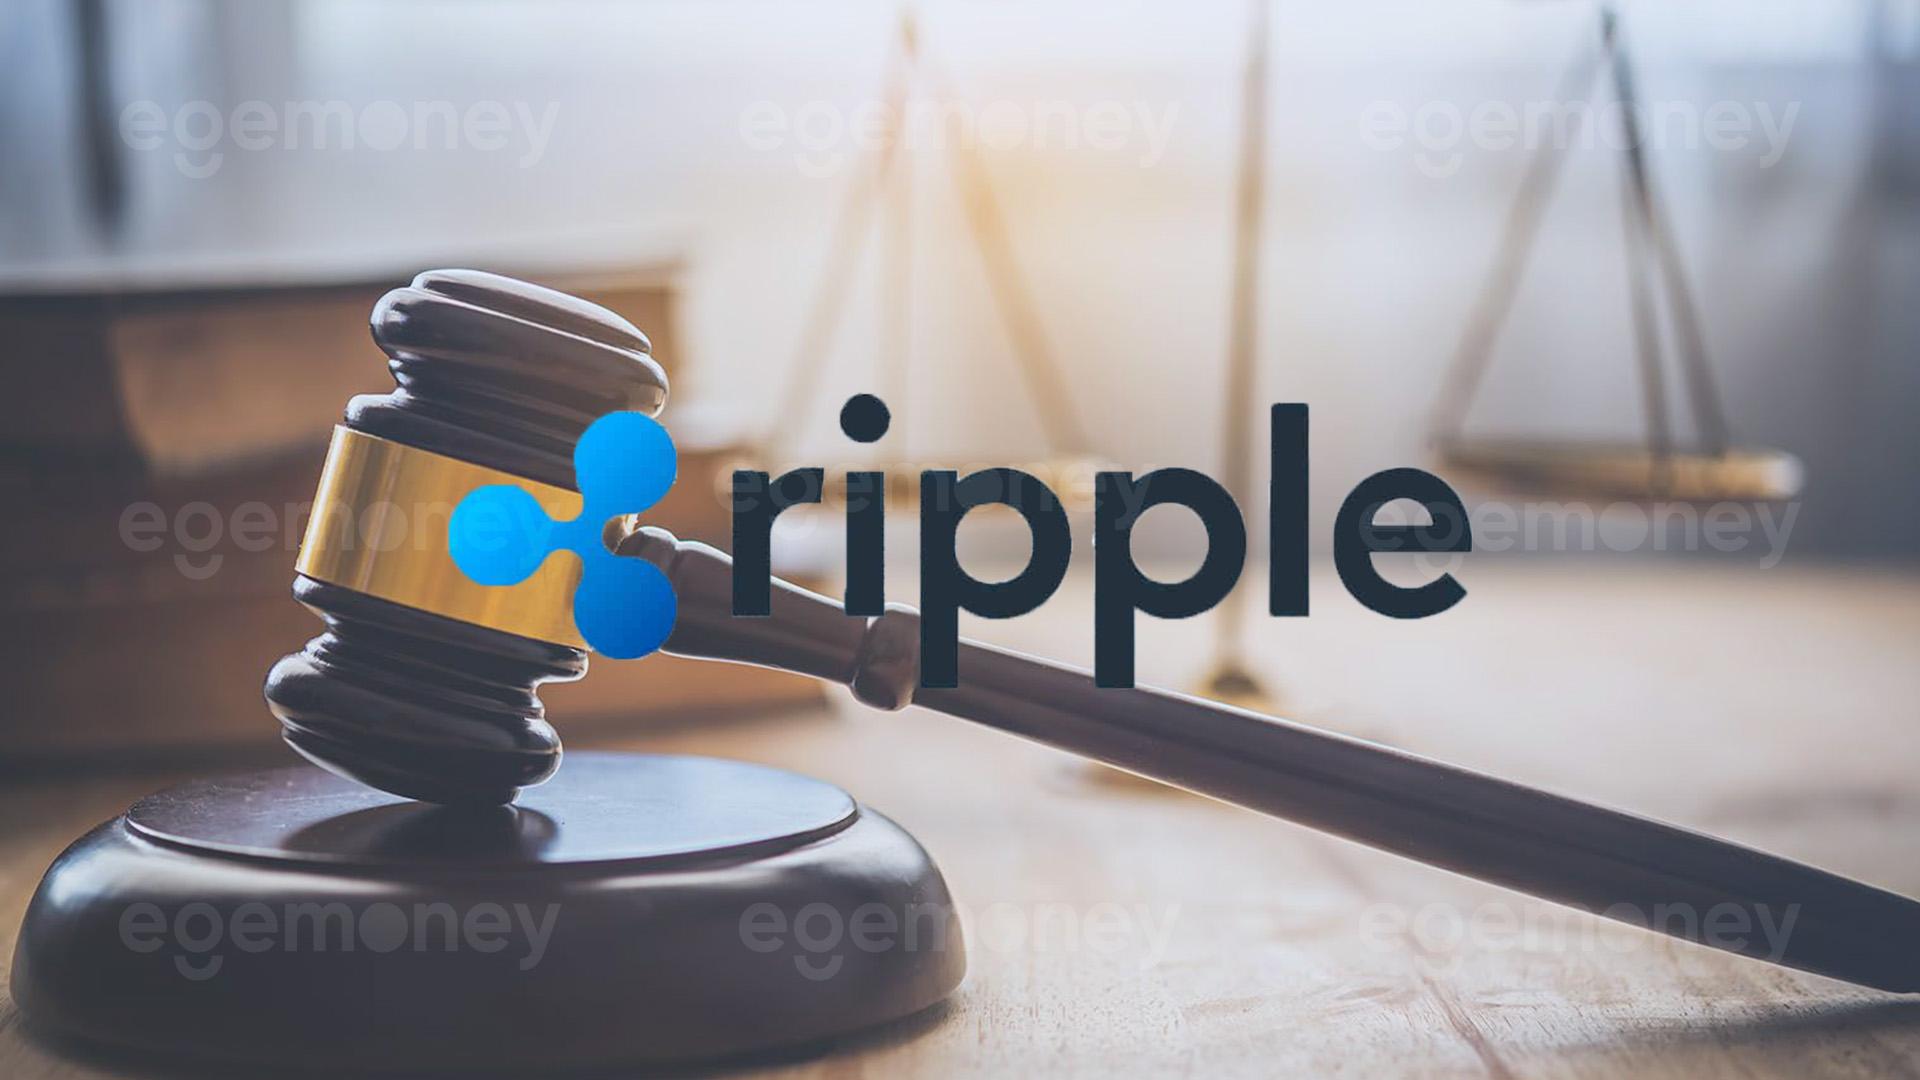 XRP Price Rising: Ripple Obtains Crypto License in Singapore